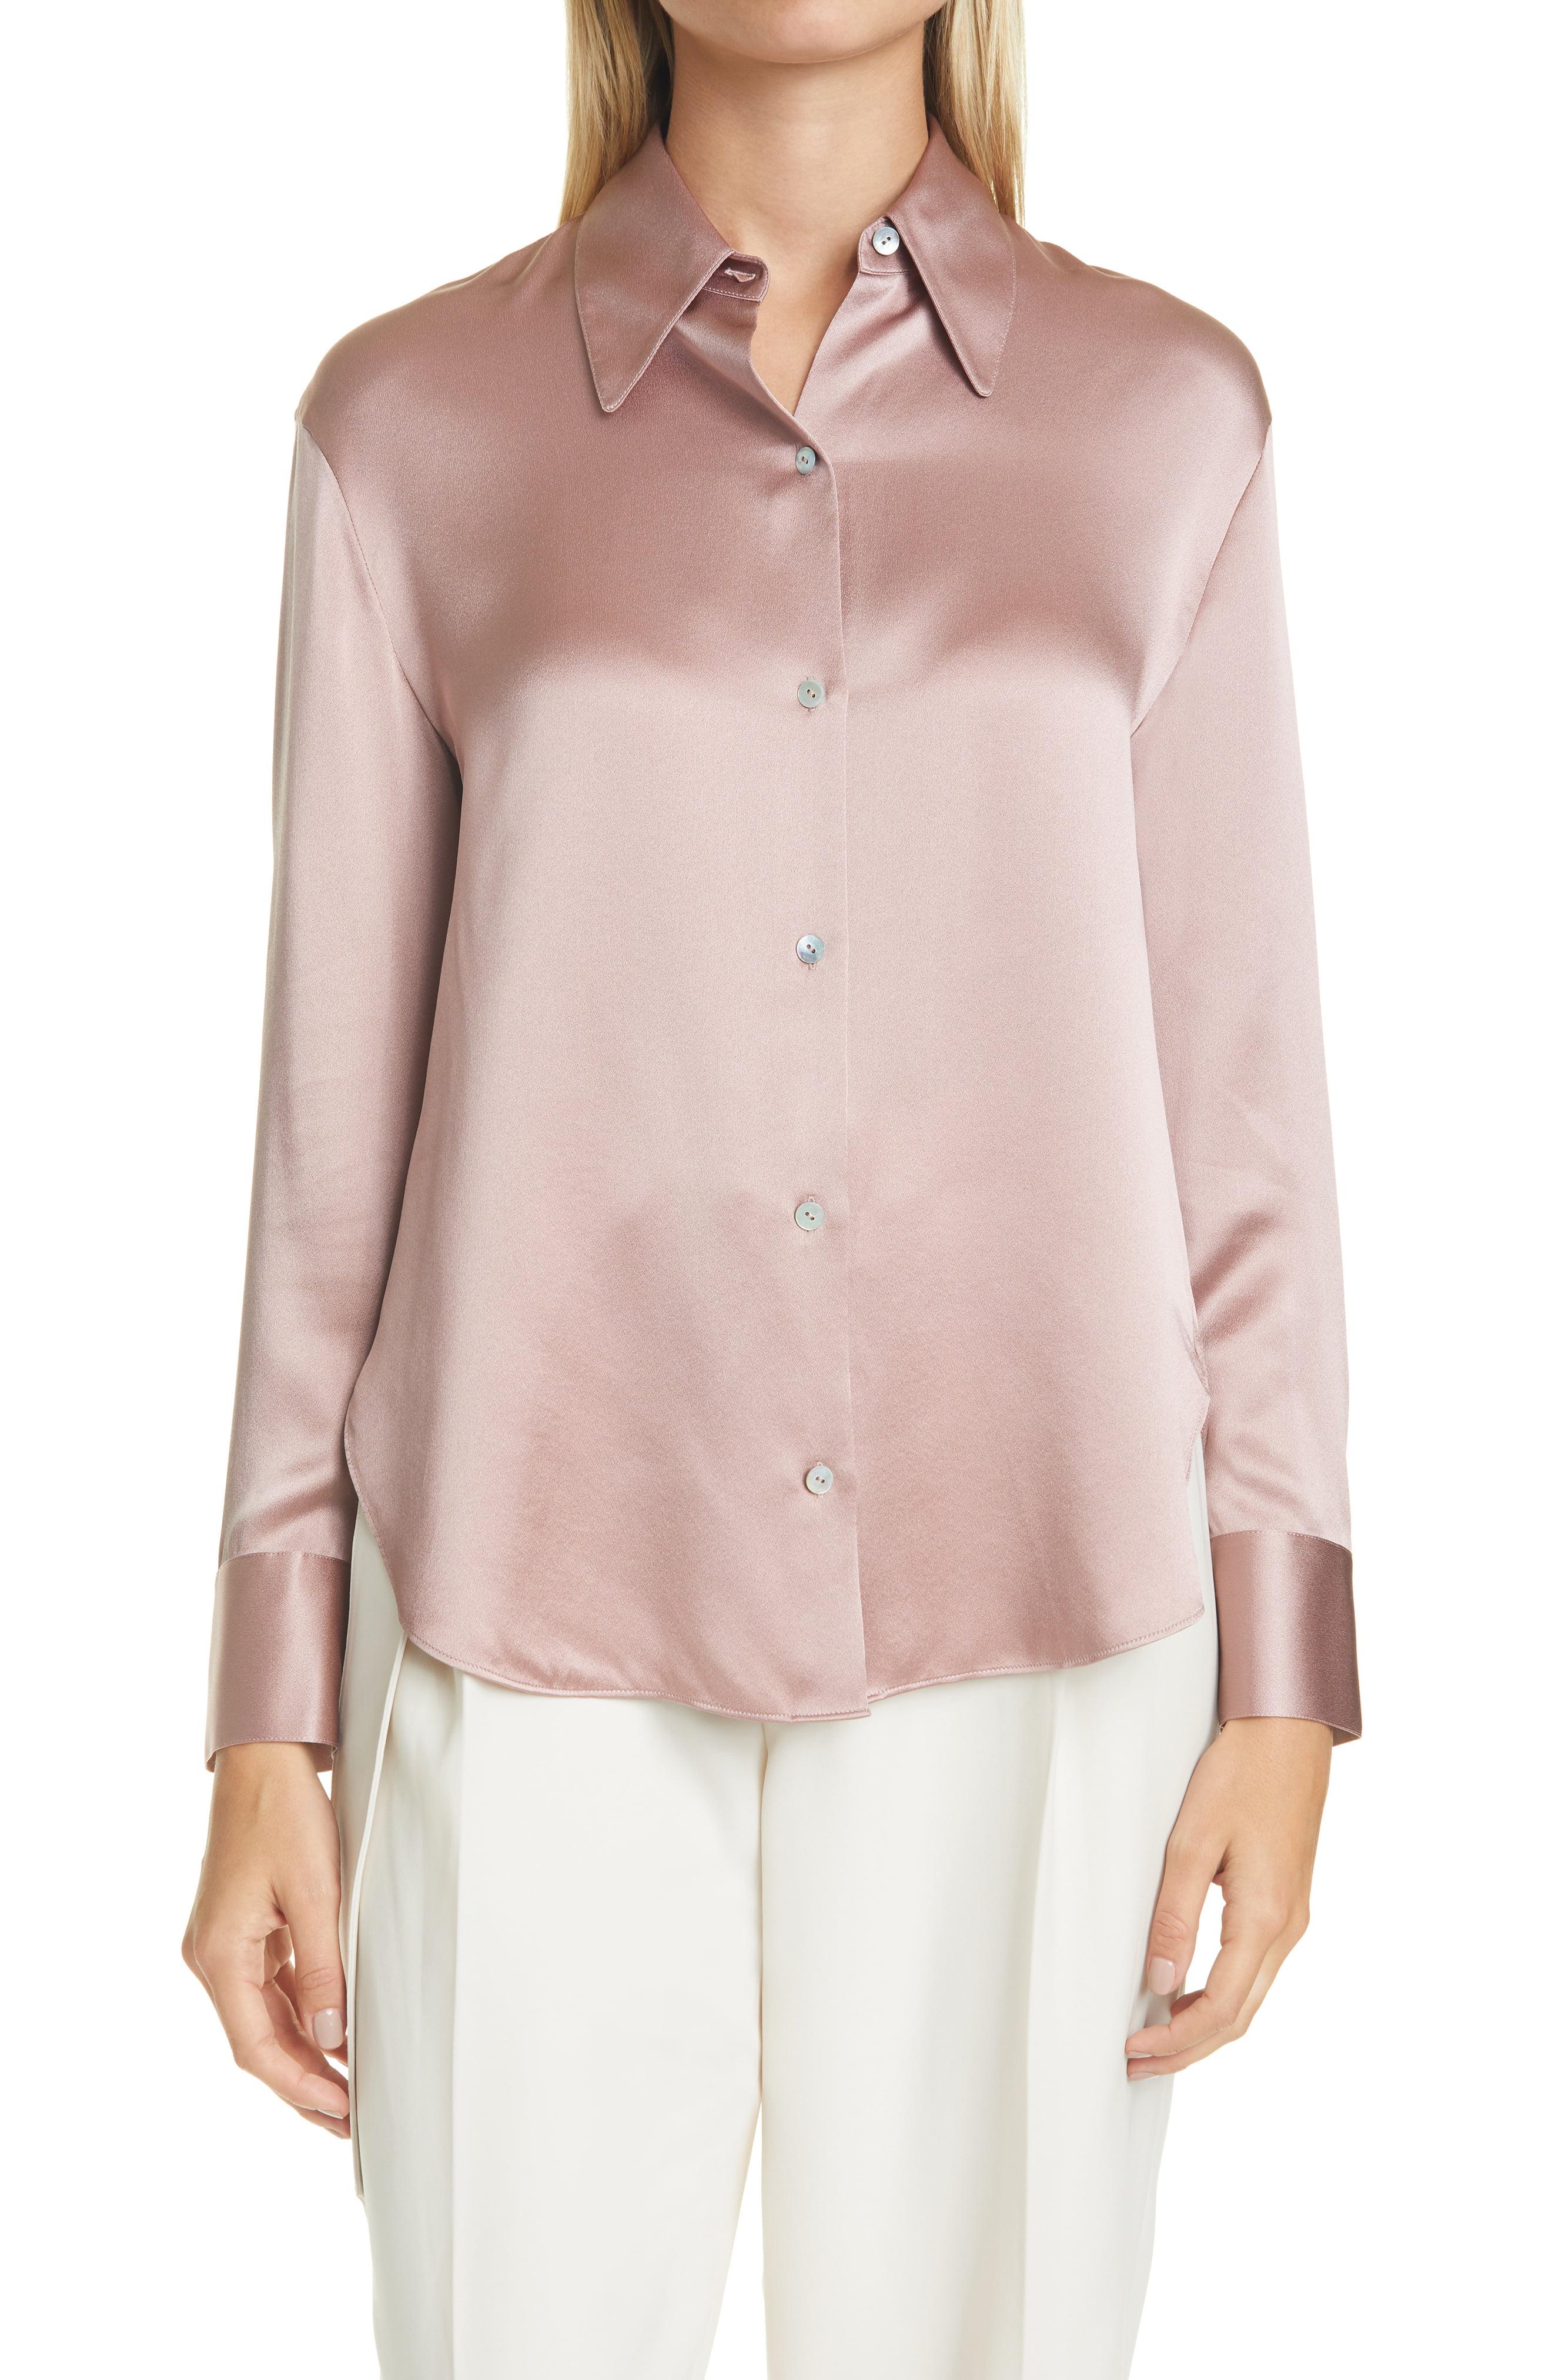 Vince Shaped Collar Silk Blouse in Pink - Lyst